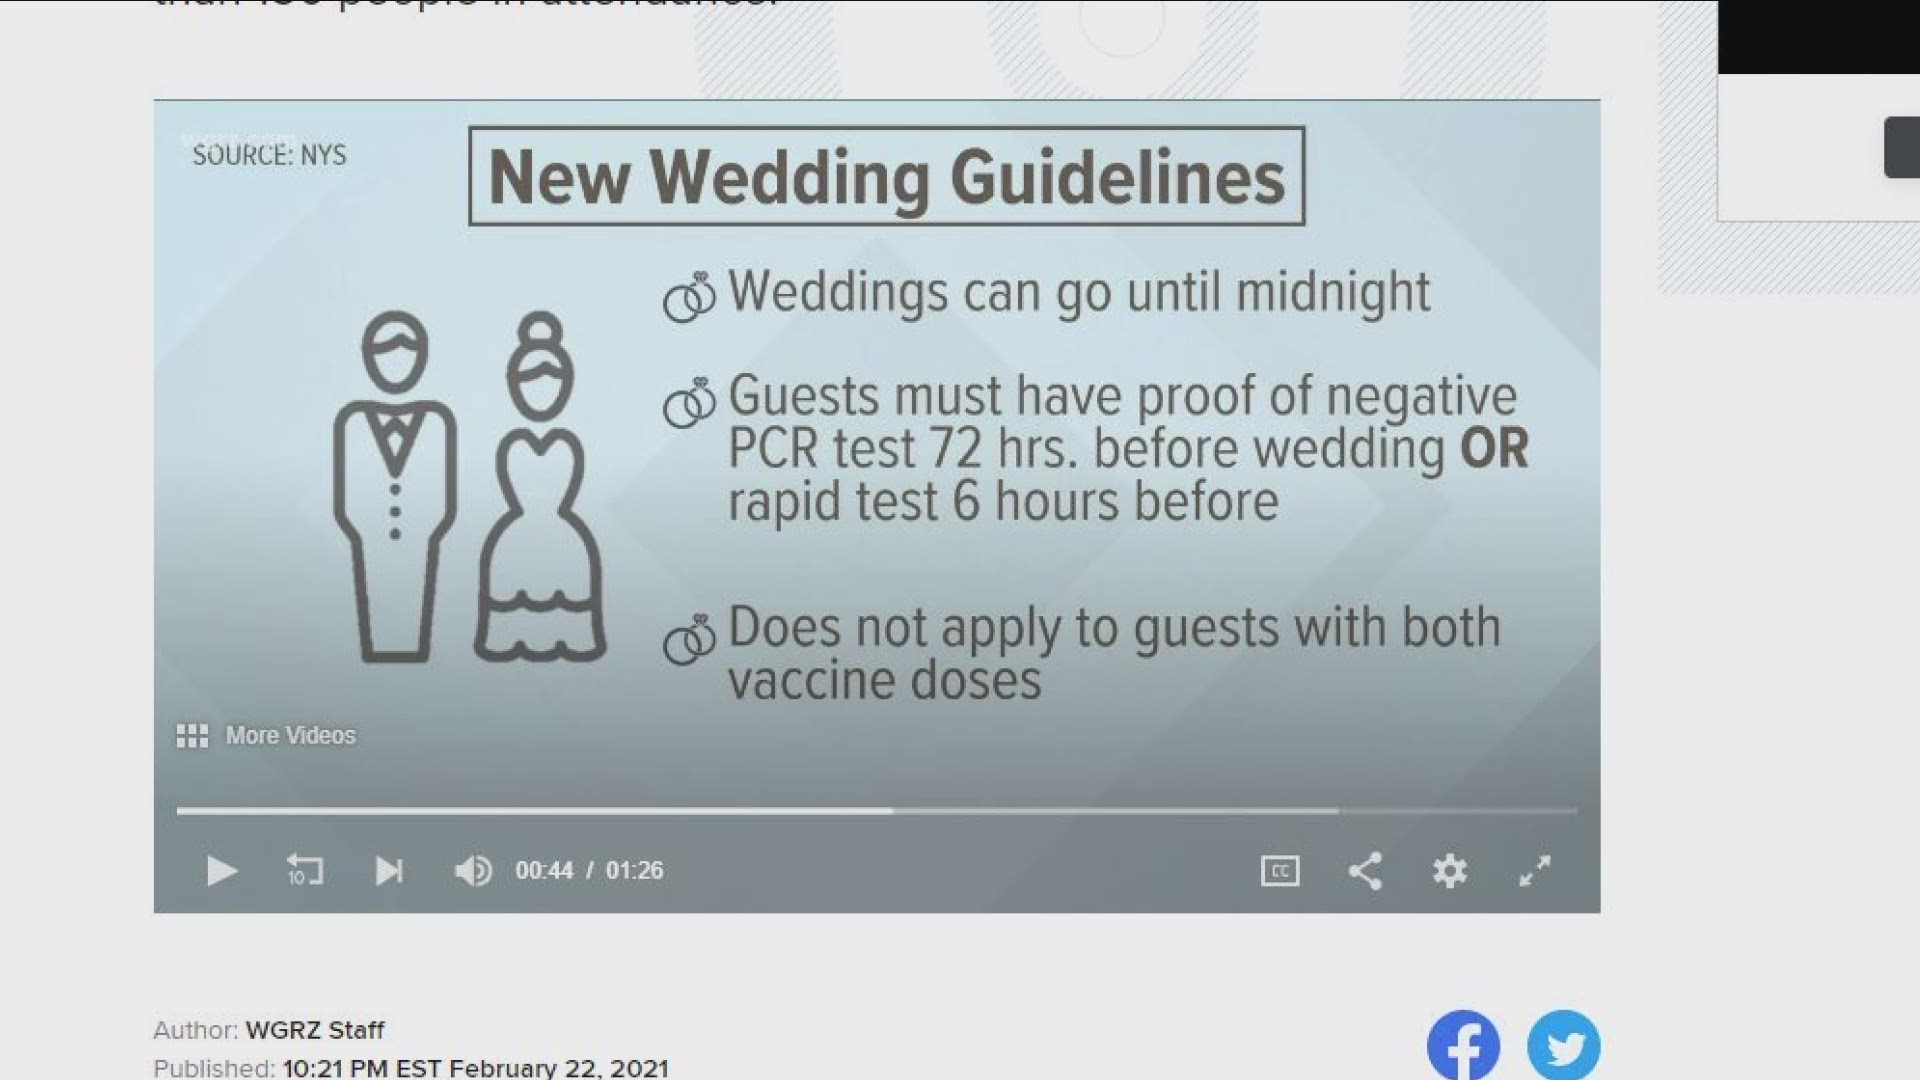 NYS updates wedding guidelines